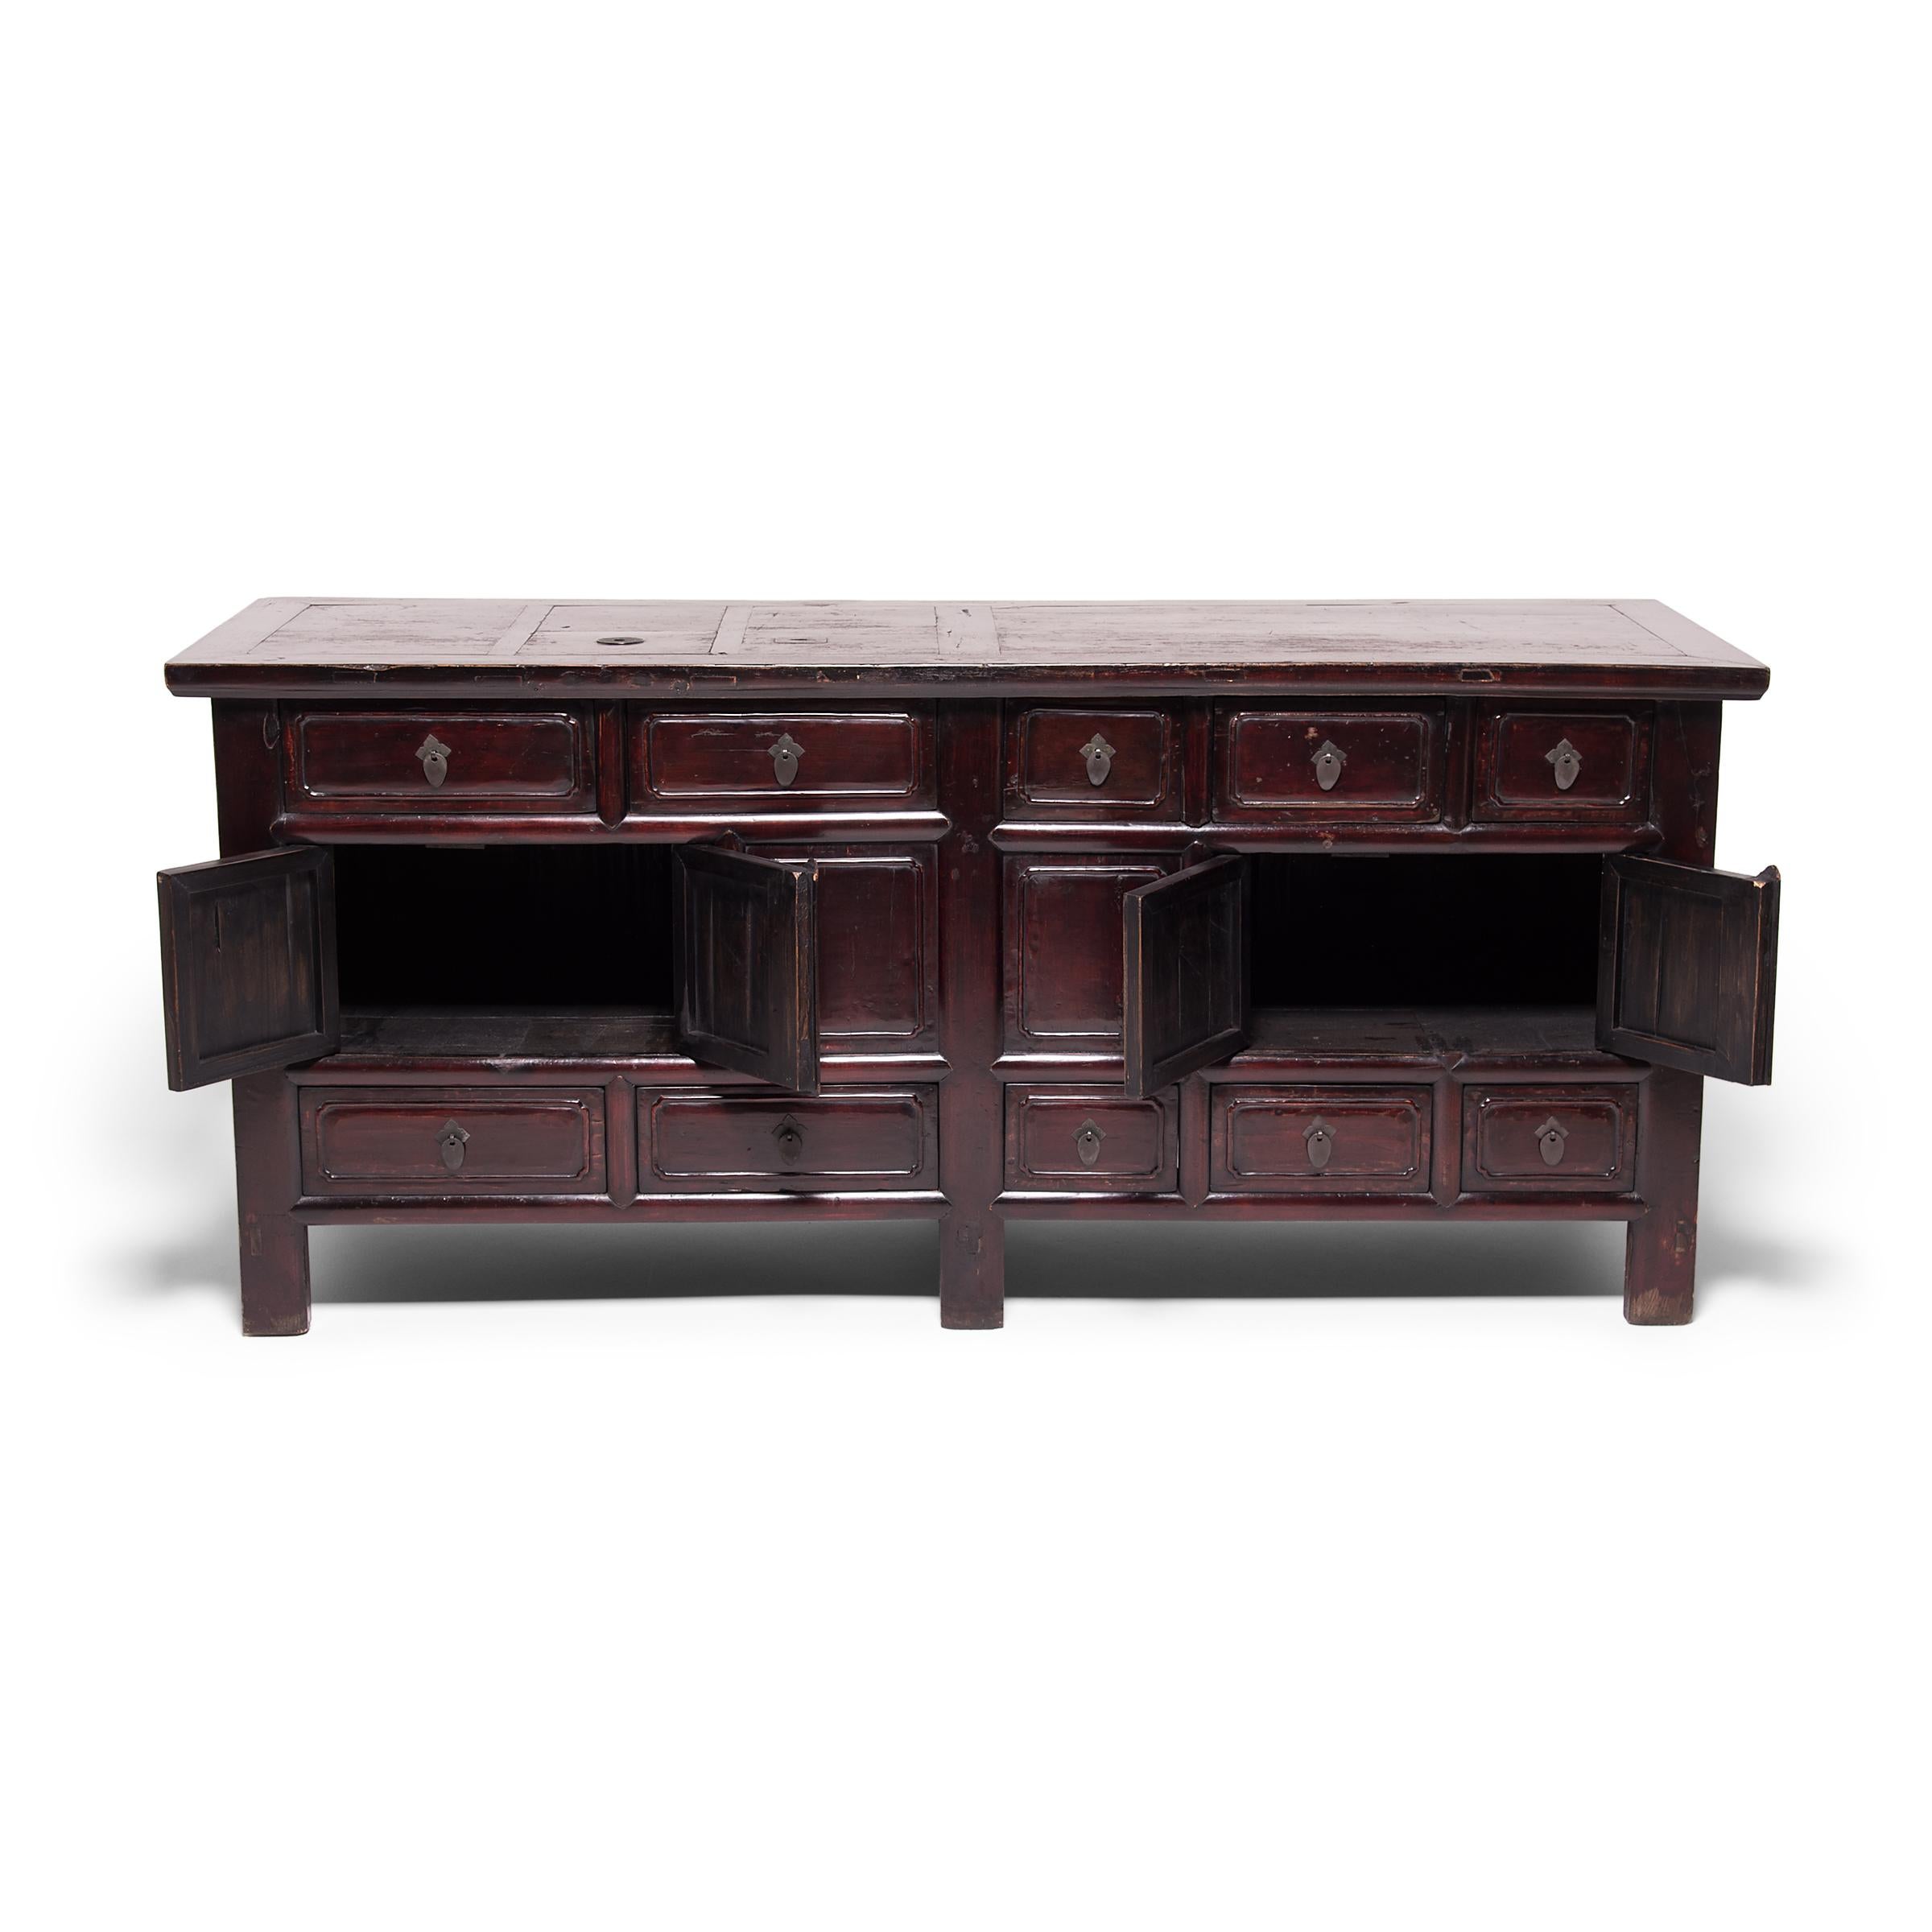 Intricately constructed with traditional mortise-and-tenon joinery, this lacquered coffer was crafted by an artisan in northern China during the late Qing dynasty. Popular in China since ancient times, lacquer needed to be carefully applied by hand,